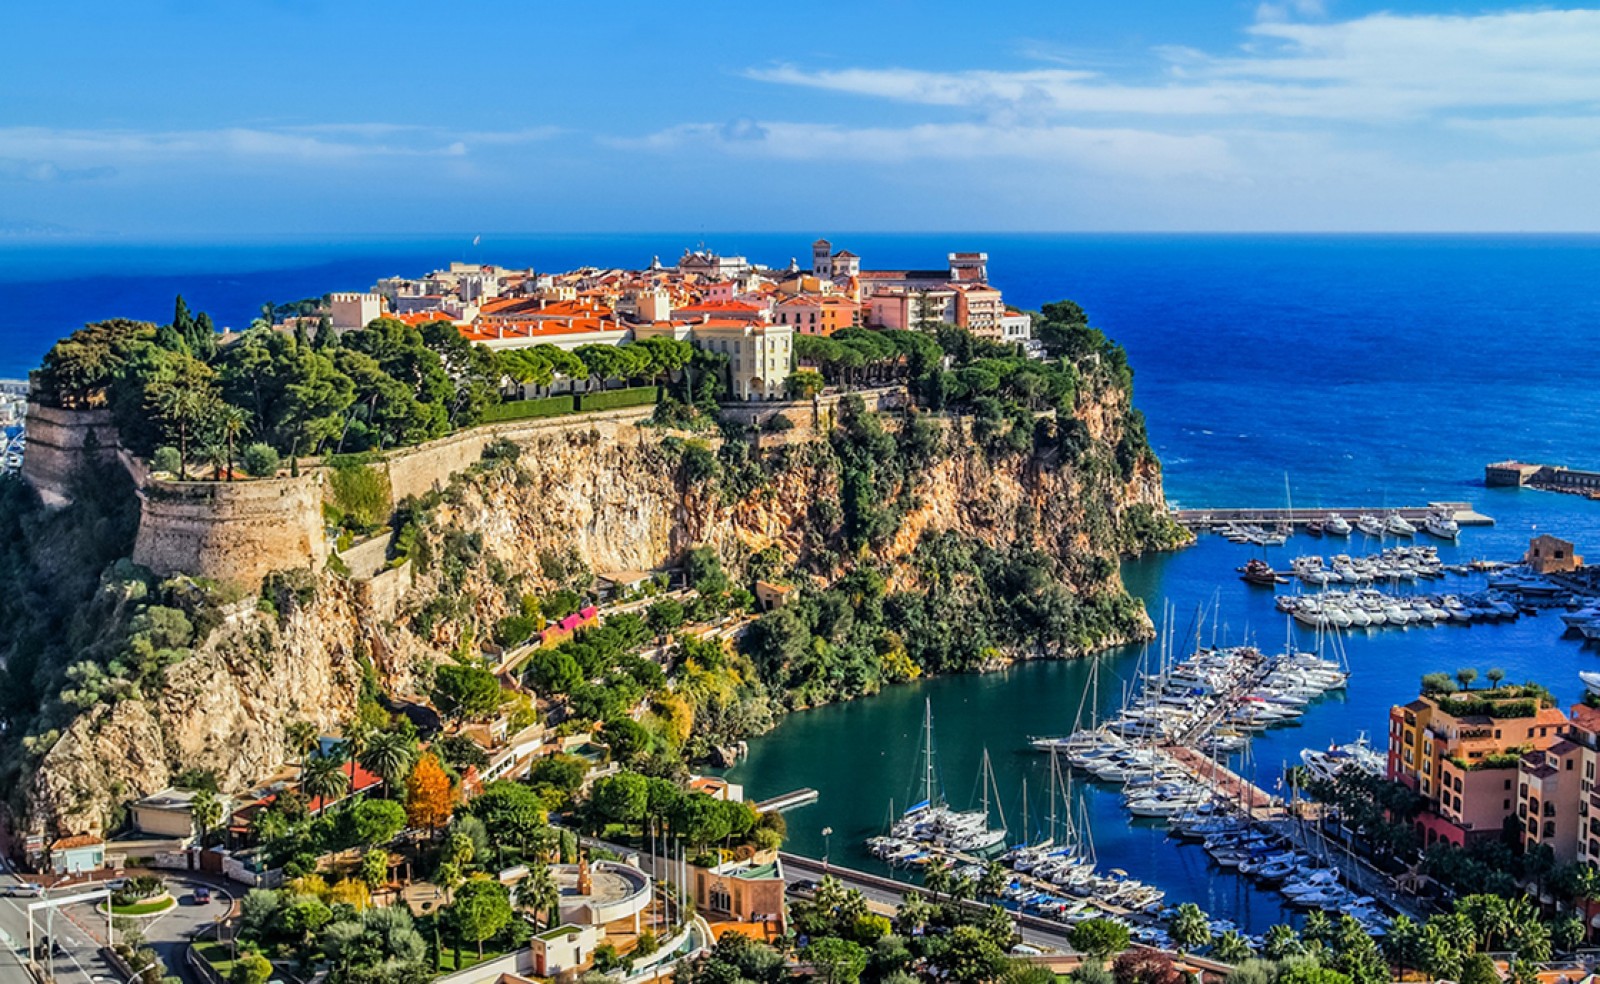 Transfer from Nice Airport to Monaco - Book your transfer 24/7 - Ruby Services - Book Your Transfer From Nice Airport to Monaco With Private Chauffeur. Airport 